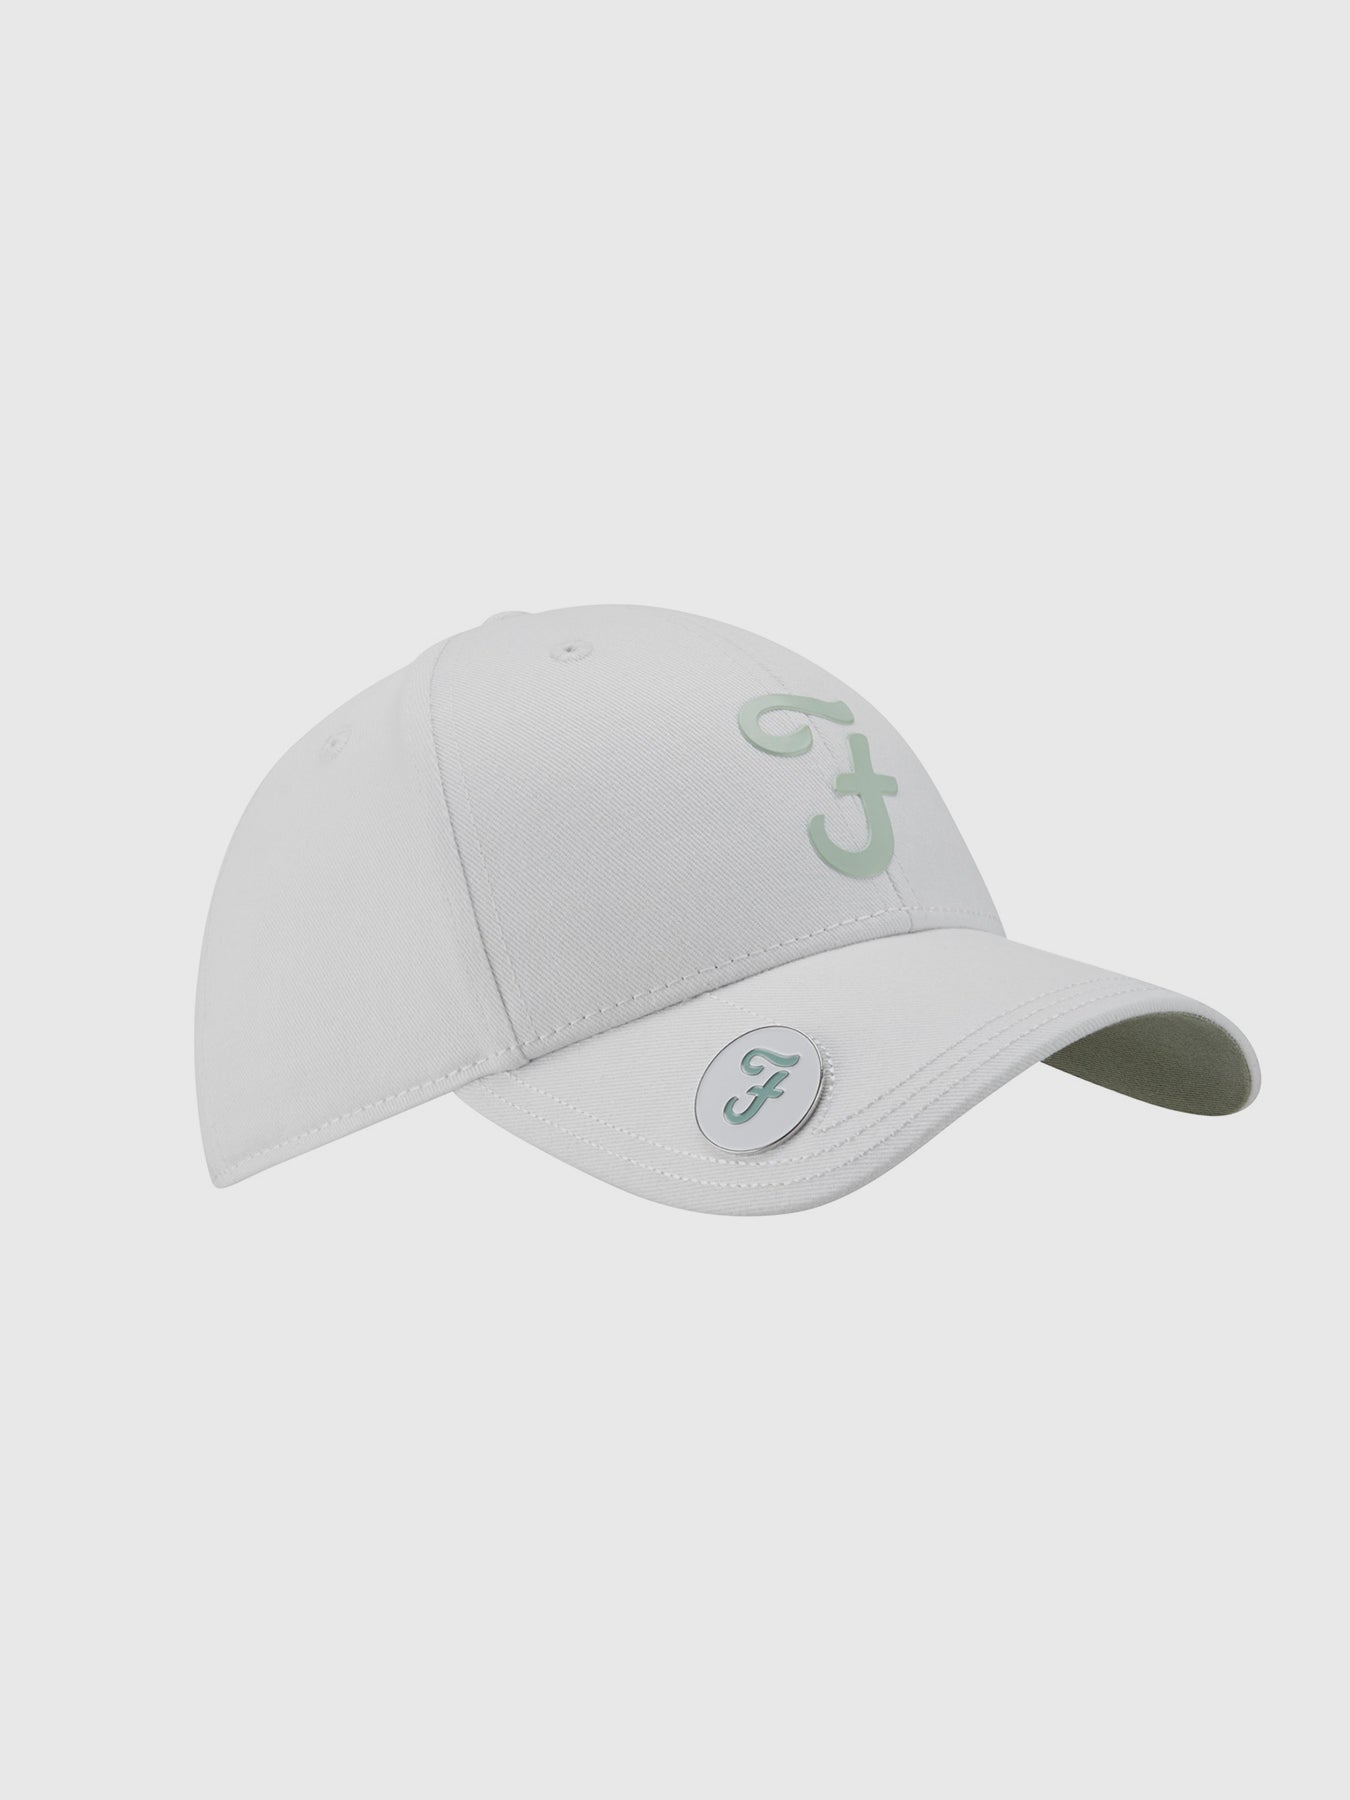 View Reno Golf Cap With Ball Marker In White information